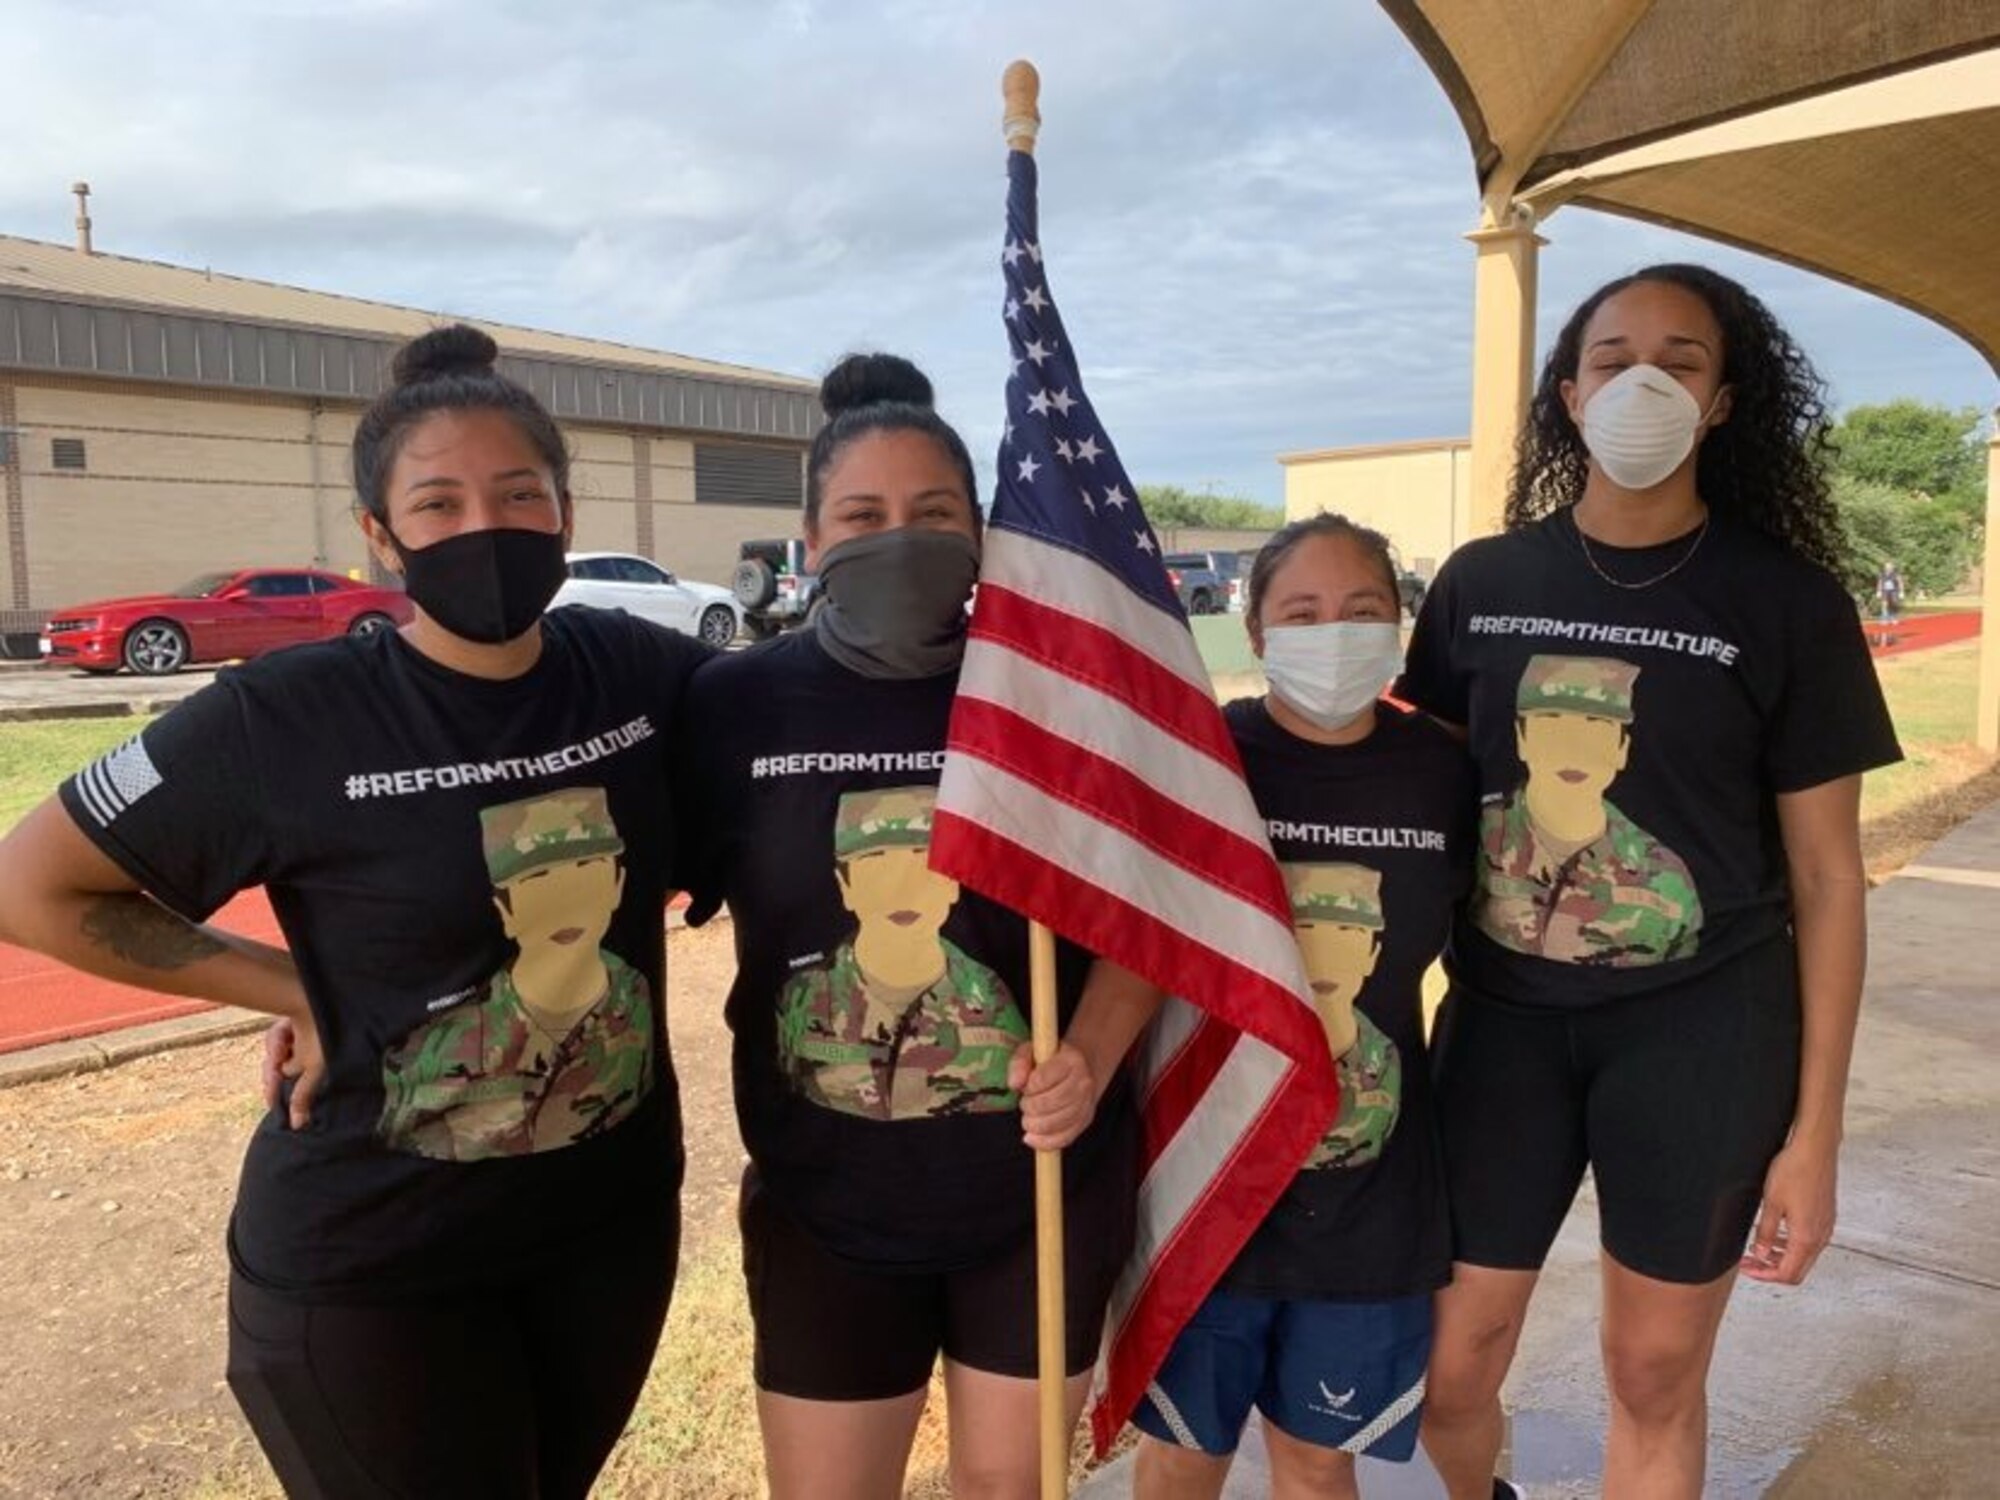 The four event coordinators, Technical Sgt. Alejandra Avila, Staff Sgt. Solenine Izquierdo, Staff Sgt. Melissa Garcia and Staff Sgt. Monique McDonald, pose for a photo during the 37th Training Wing hosted 24-hour walk honoring fallen U.S. Army SPC Vanessa Guillen, 25-26 July, 2020. The event was a way for community participants to make a stand against injustice and reiterate the DoD's zero tolerance of sexual misconduct and interpersonal violence.